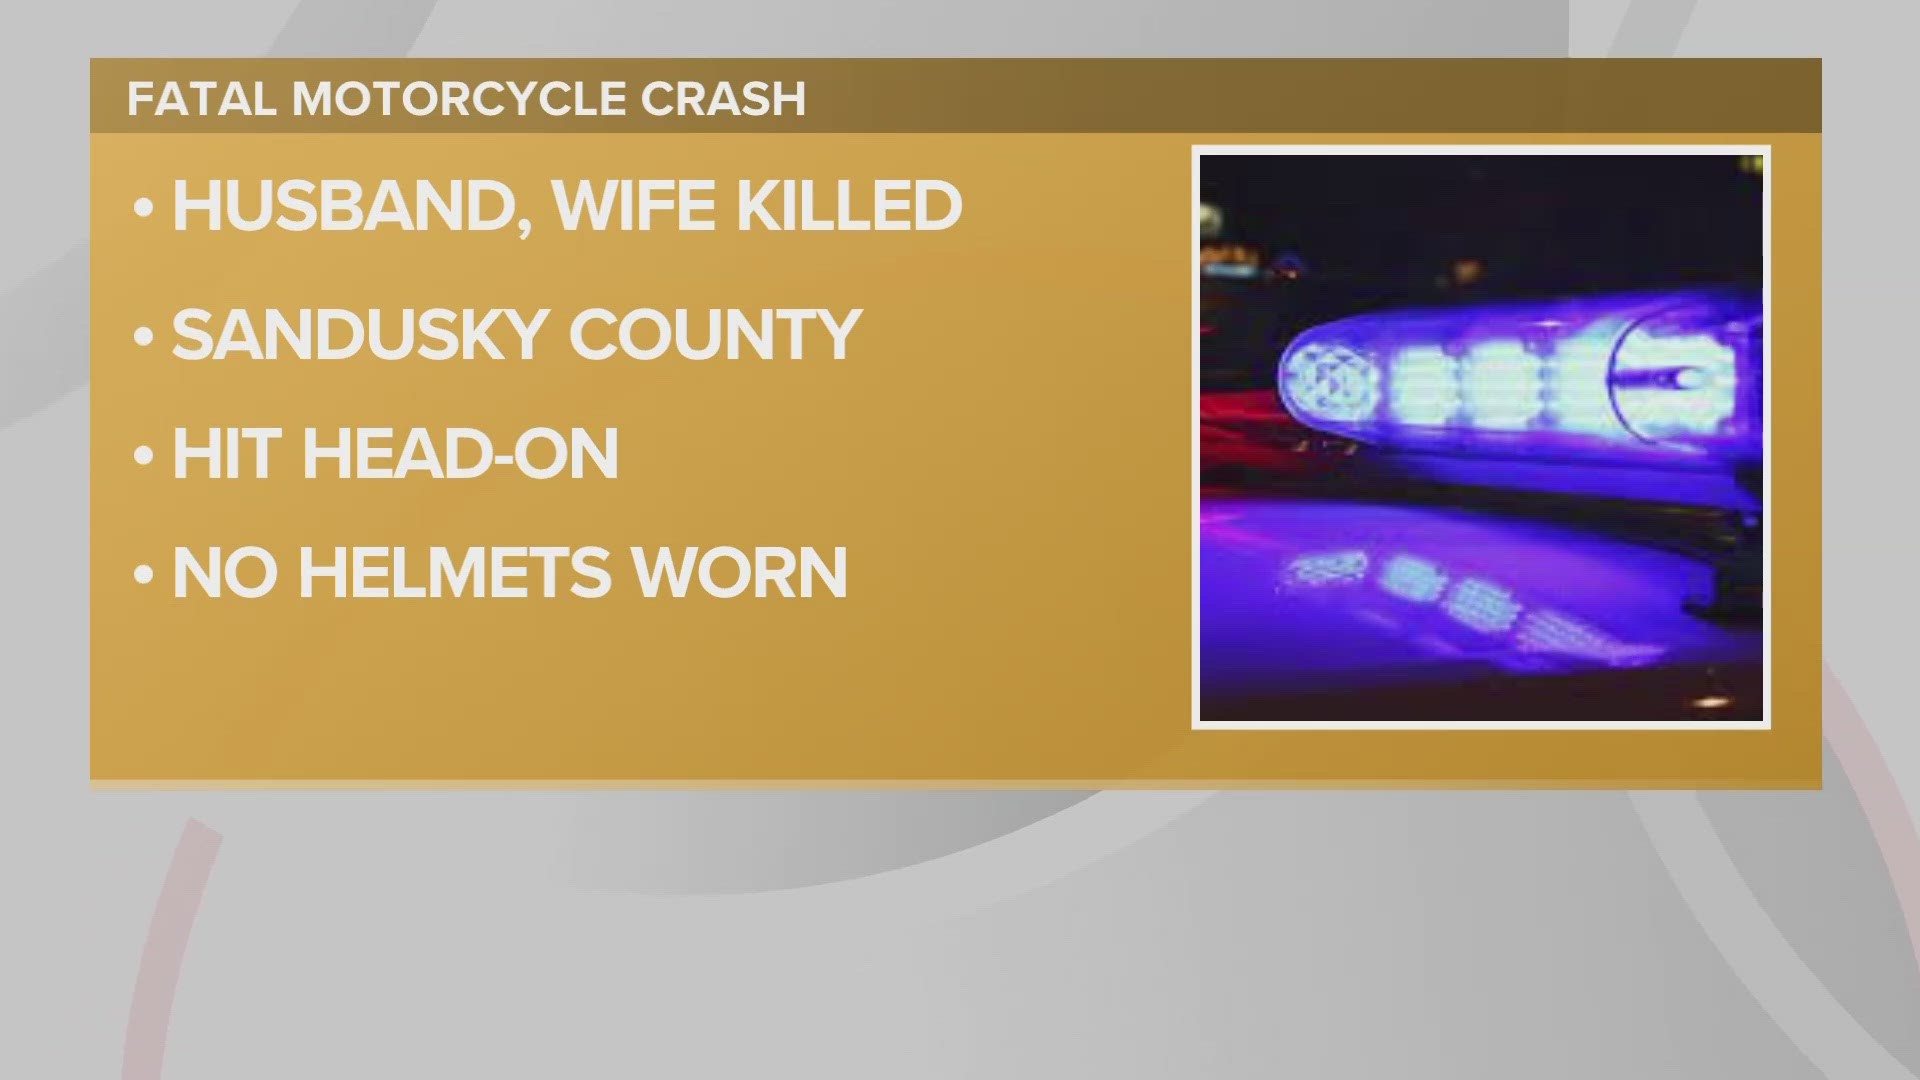 The Ohio State Highway Patrol is investigating after a man and woman were killed in a head-on motorcycle crash on Saturday.